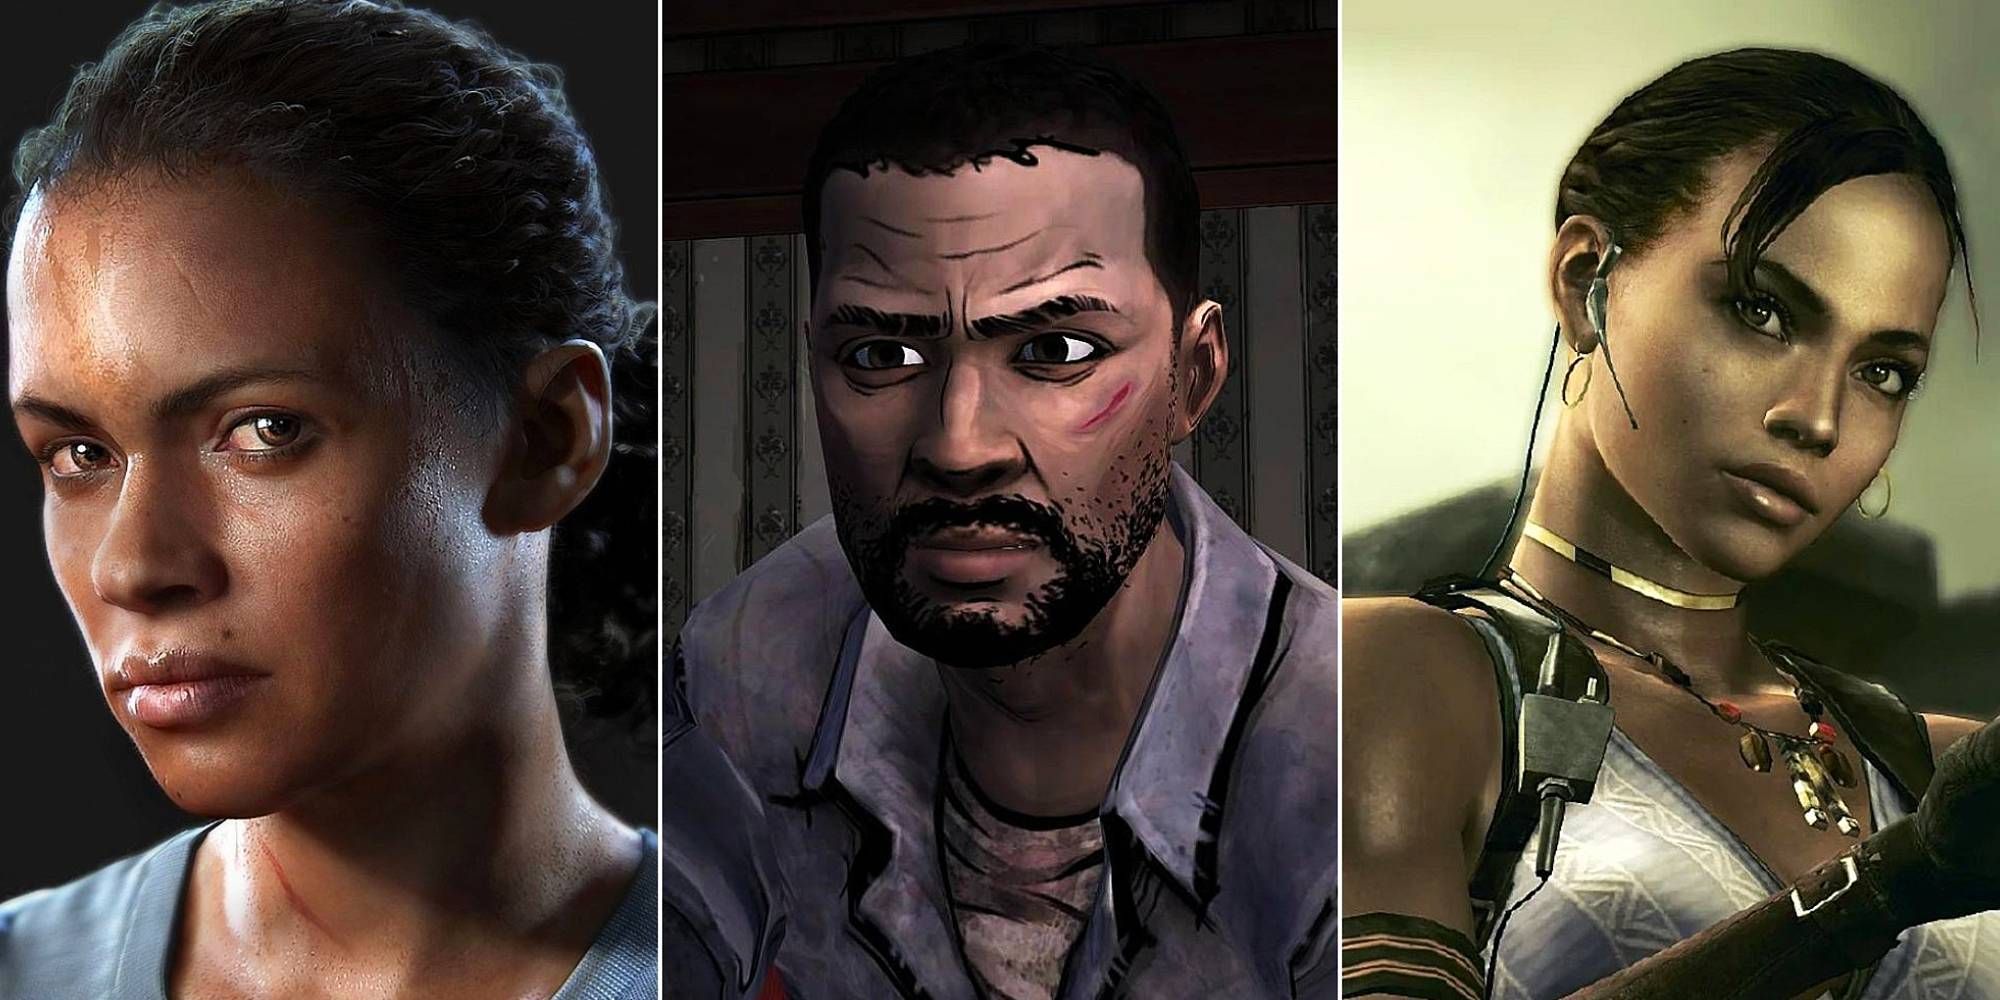 A collage image featuring Nadine Ross from Uncharted, Lee Everett from The Walking Dead and Sheva Alomar from Resident Evil 5